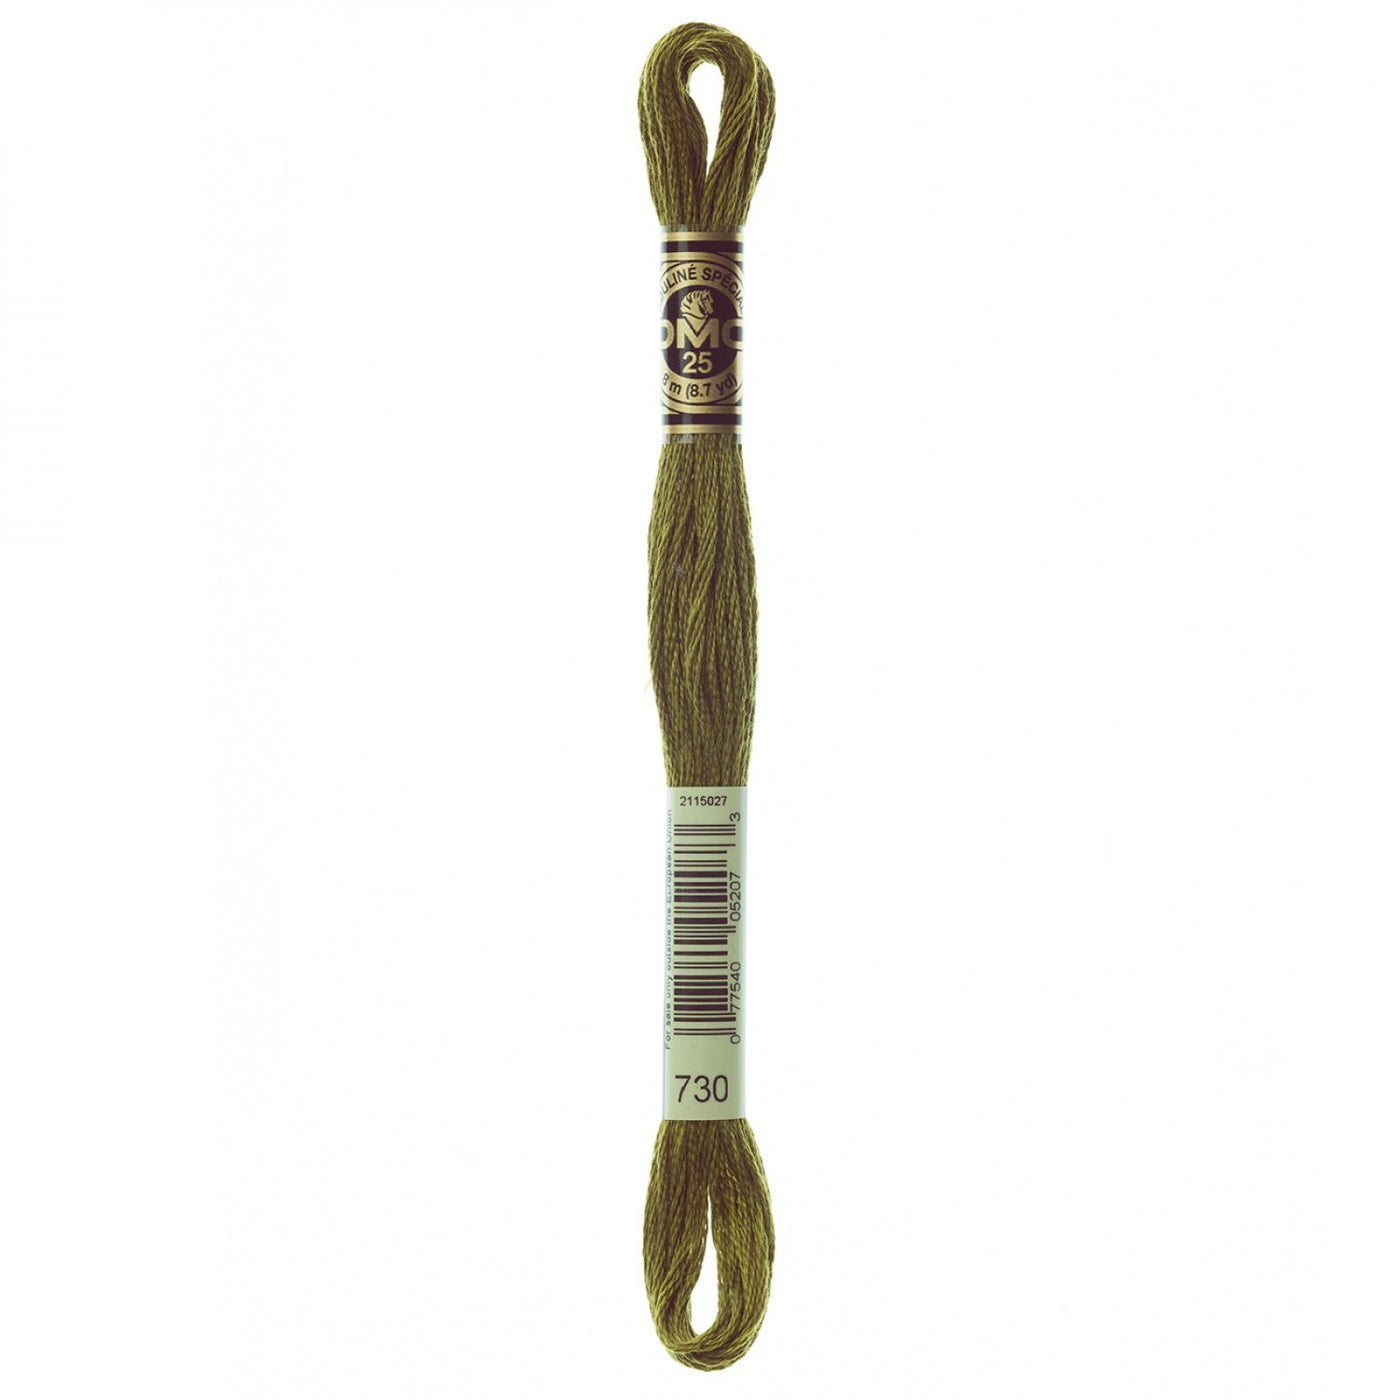 Strand Embroidery Floss 730 Very Dark Olive Green (6732895125669)